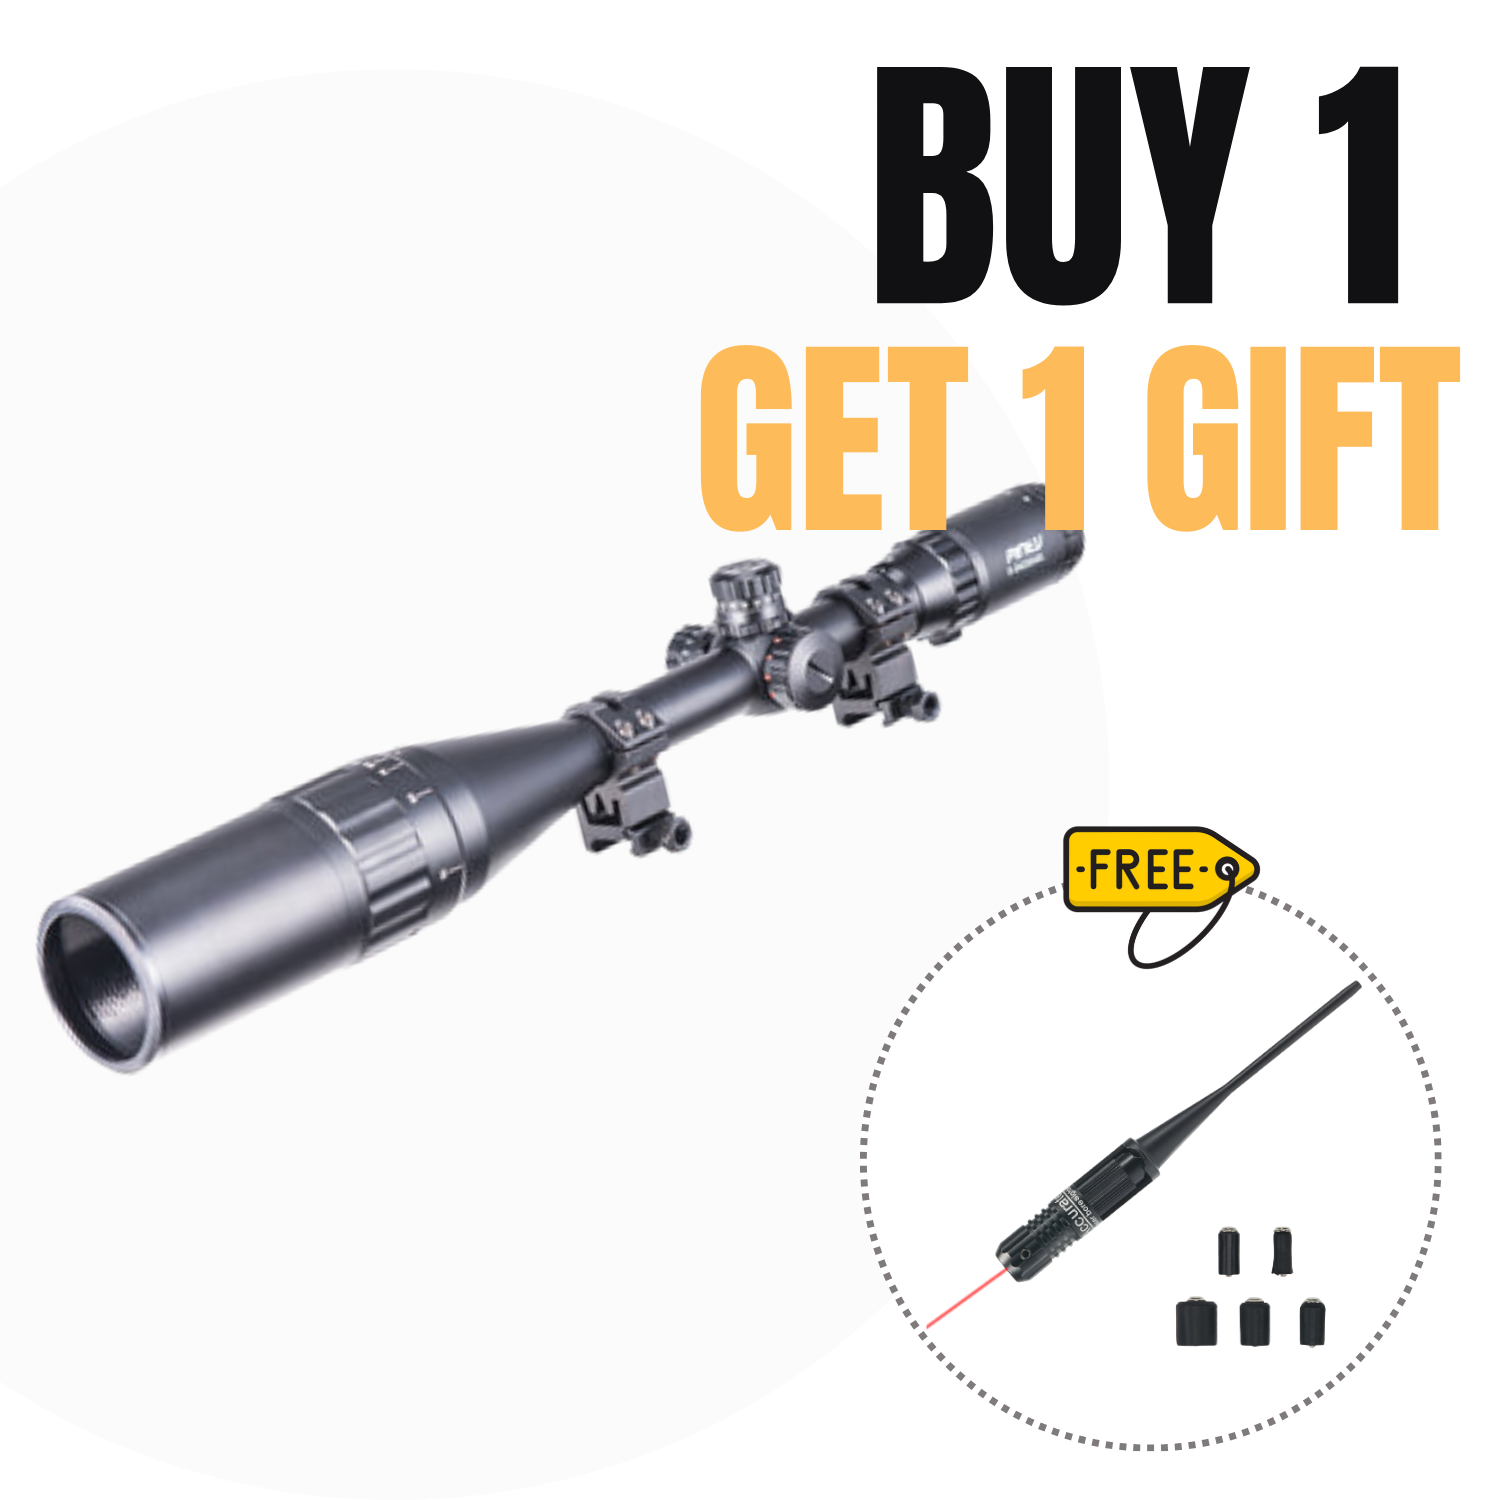 【BUY 1 GET 1 FREE BORESIGHT GIFT】6-24x50 AO Illuminated Mil-dot Rifle Scope with Sunshade Tube, Flip-up Cap and Ring Mount High-profile Picatinny Rings